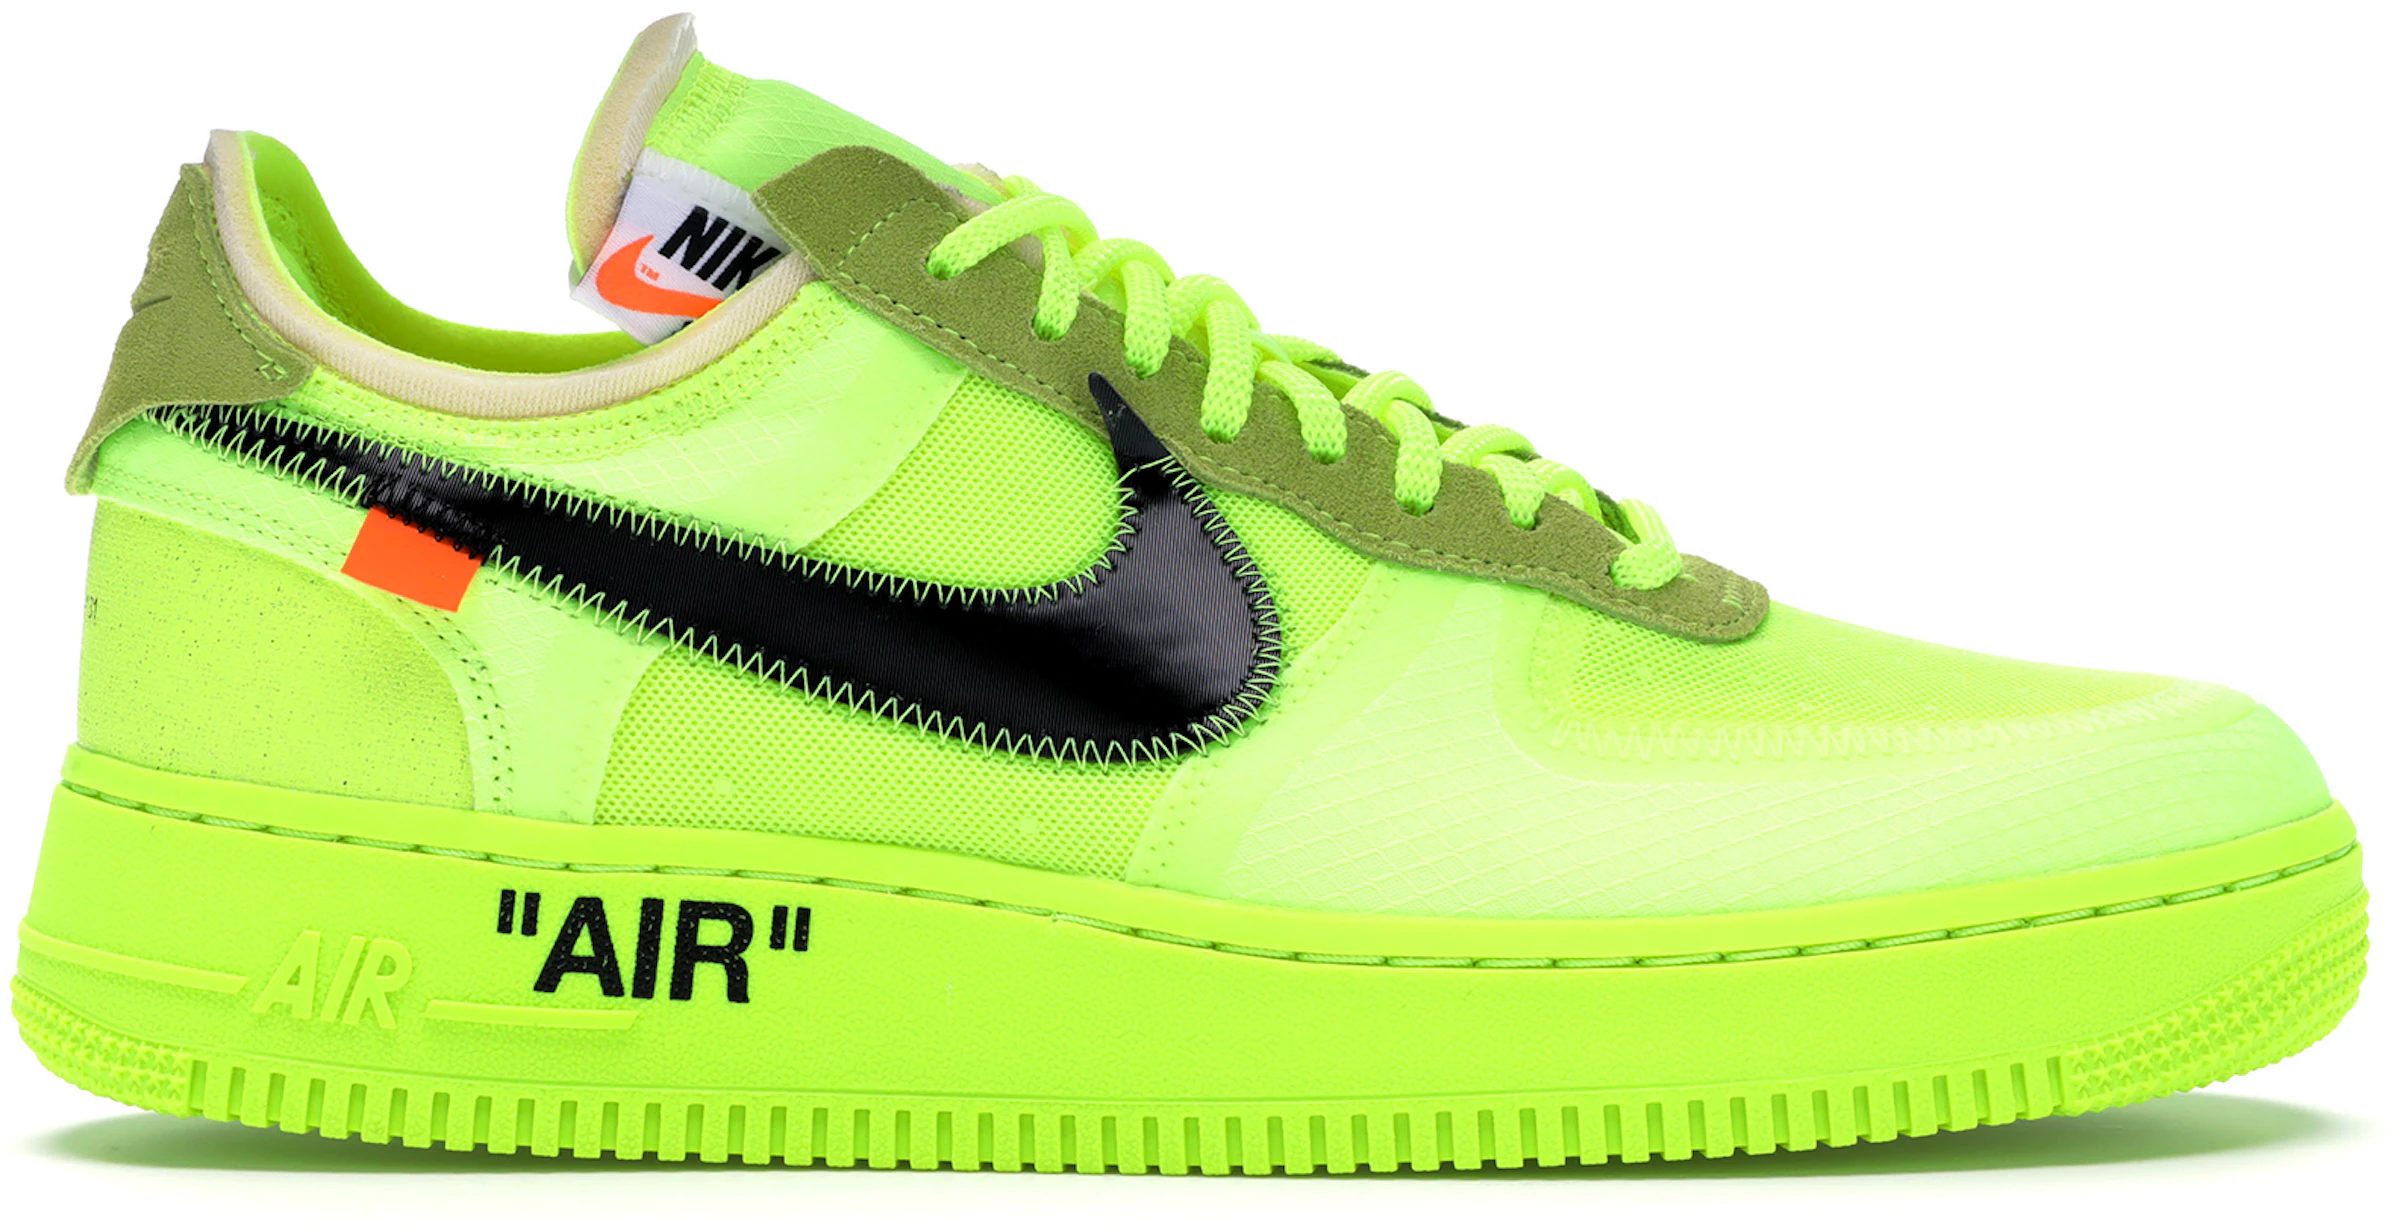 Nike Air Force 1 Shoes - Average Price